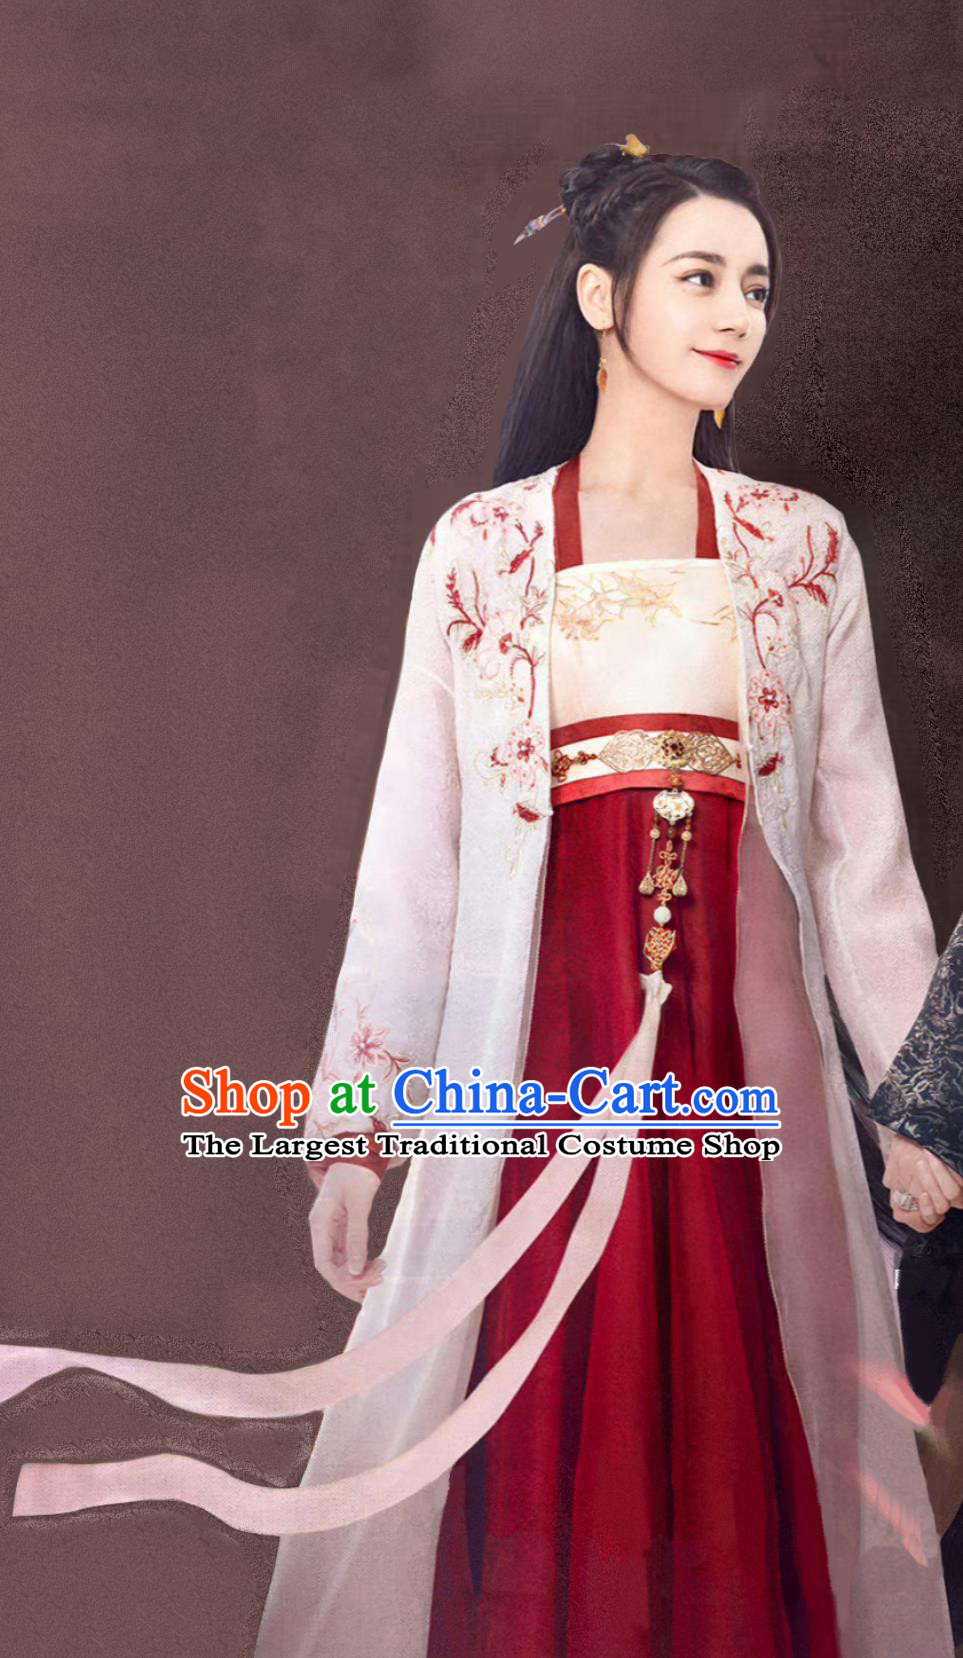 Ancient China Noble Lady Clothing Traditional Hanfu TV Series The Legend of An Le Princess Ren An Le Costume